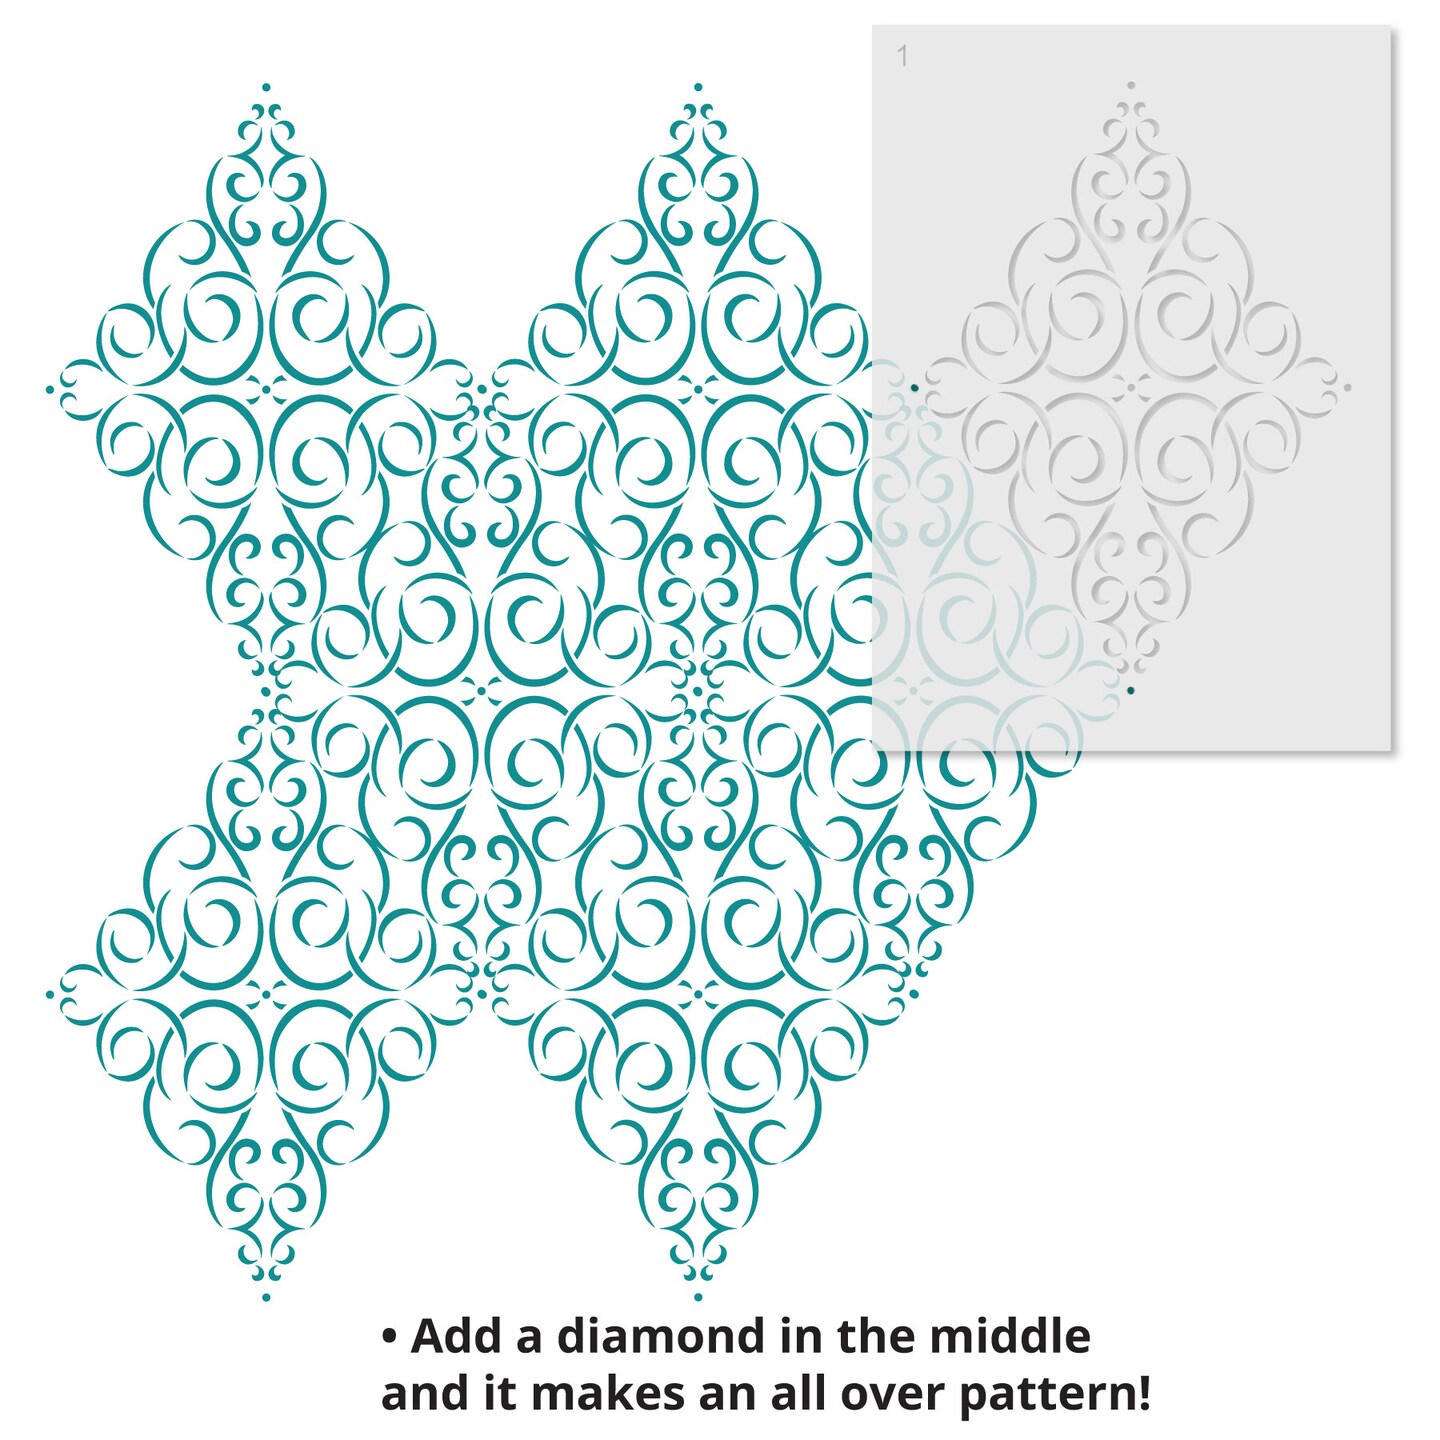 Simple Diamond Medallion Wall Stencil | 3418 by Designer Stencils | Mandala &#x26; Medallion Stencils | Reusable Art Craft Stencils for Painting on Walls, Canvas, Wood | Reusable Plastic Paint Stencil for Home Makeover | Easy to Use &#x26; Clean Art Stencil